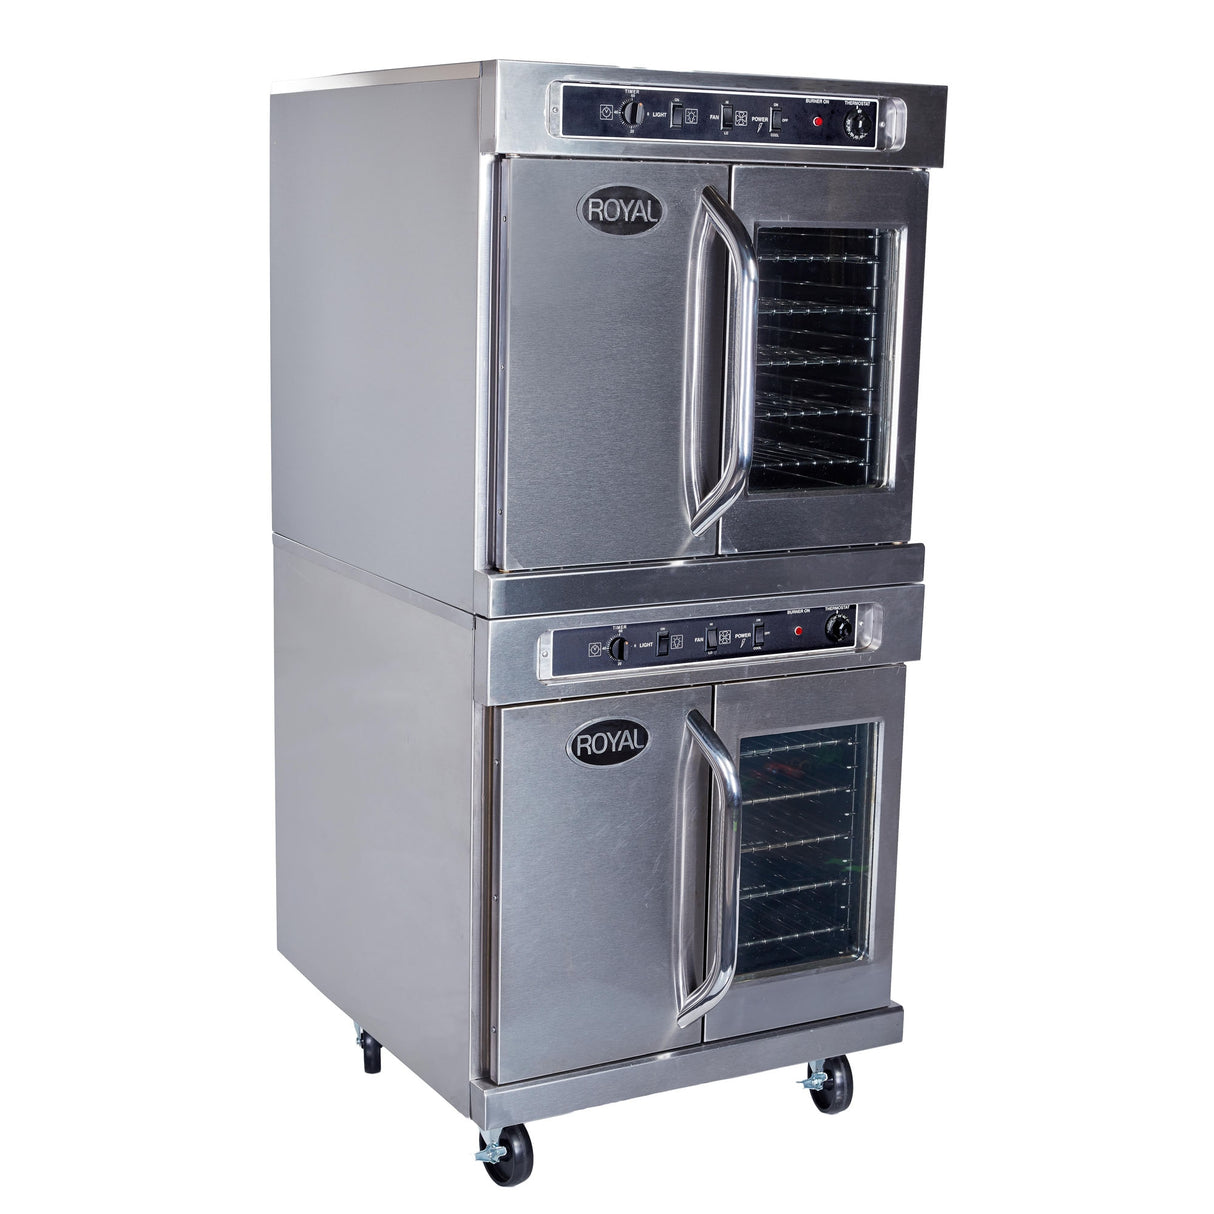 Royal Range RECOD-2 Convection Oven, Electric